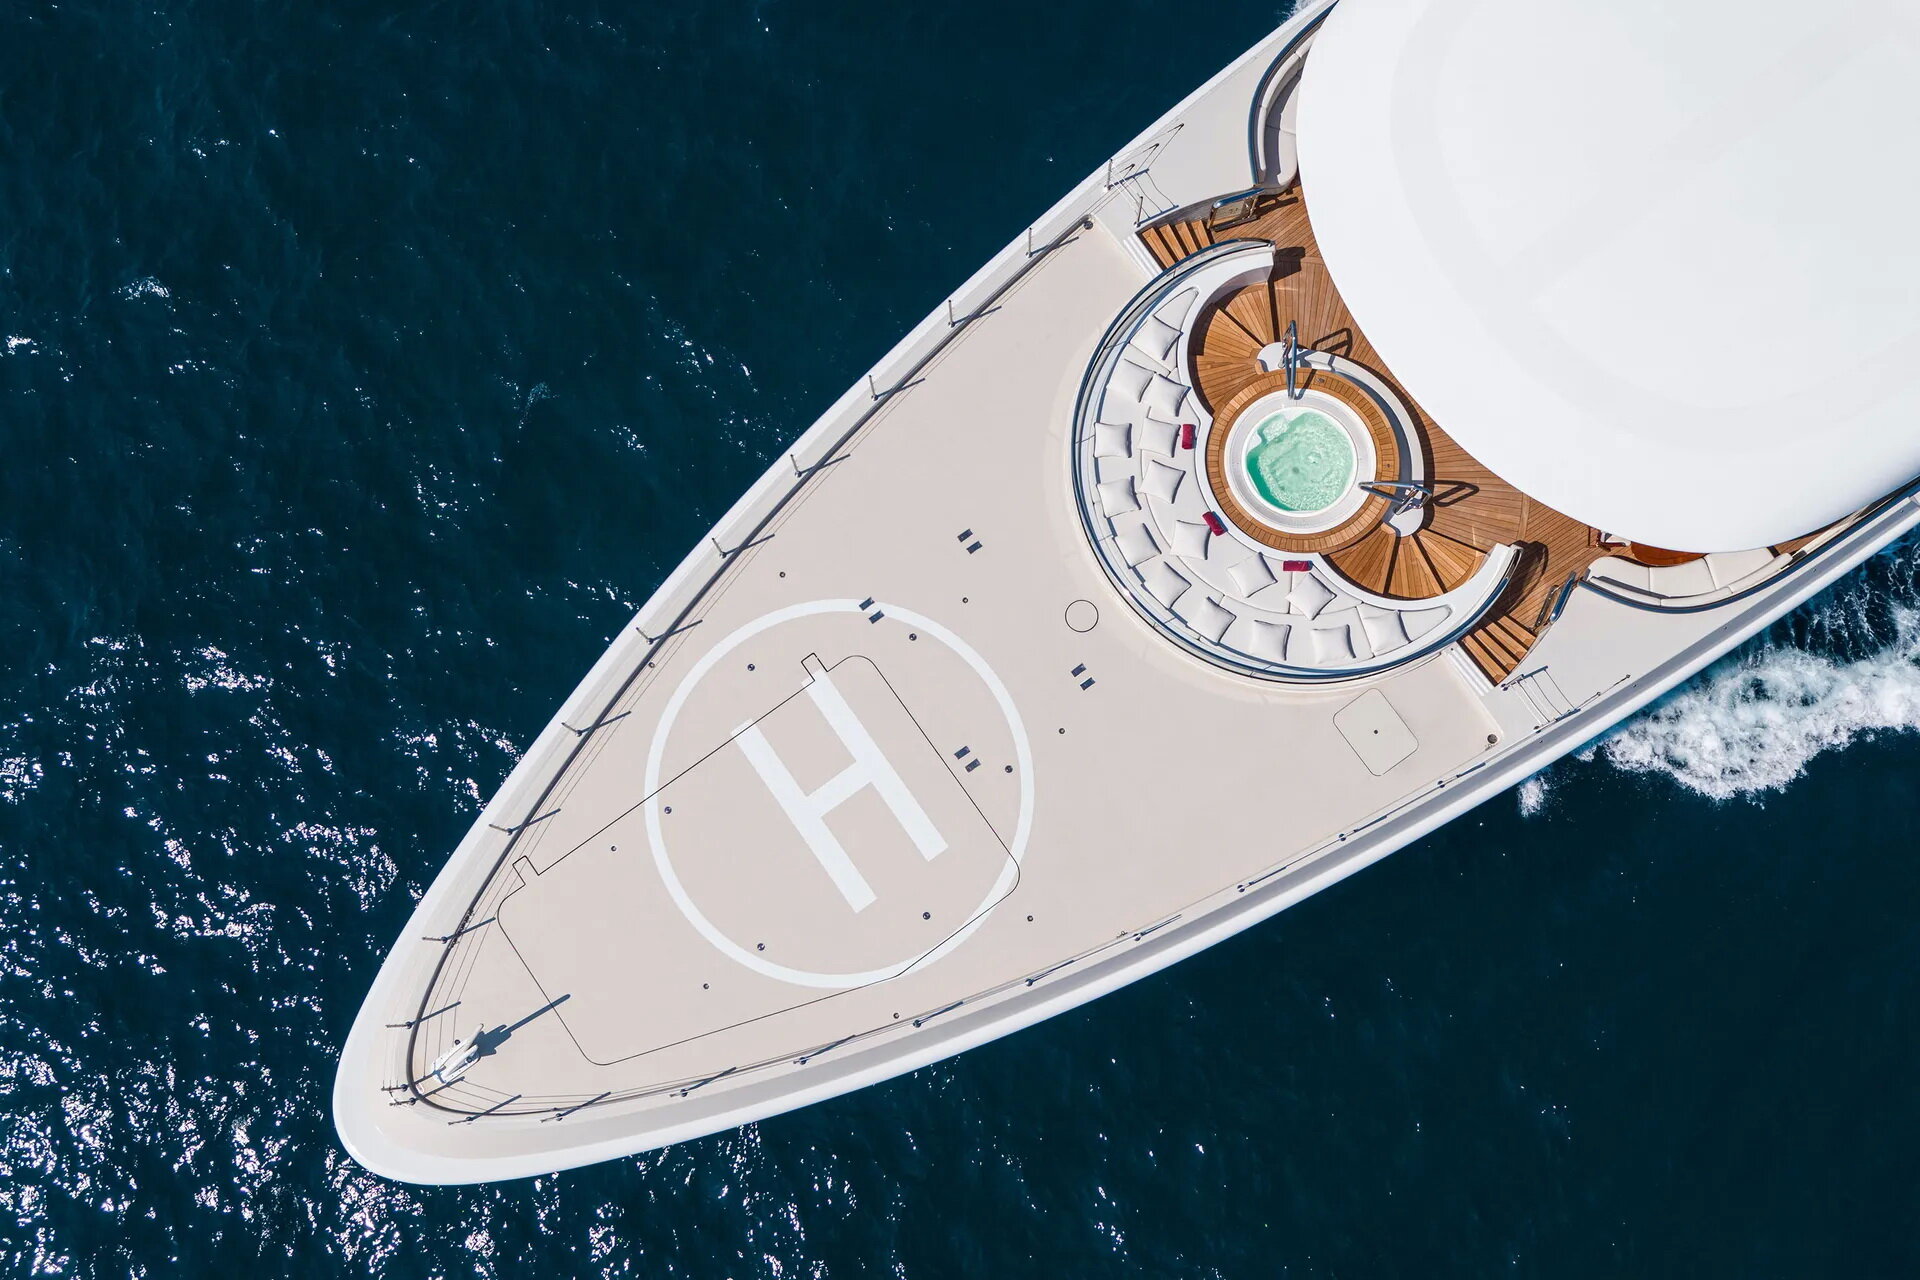 Valerie, an 85-meter luxurious superyacht allegedly belonging to Rinat Akhmetov is featured sailing in the sea. American celebrities Jennifer Lopez and Ben Affleck spent there a weekend of July 24-25, 2021.